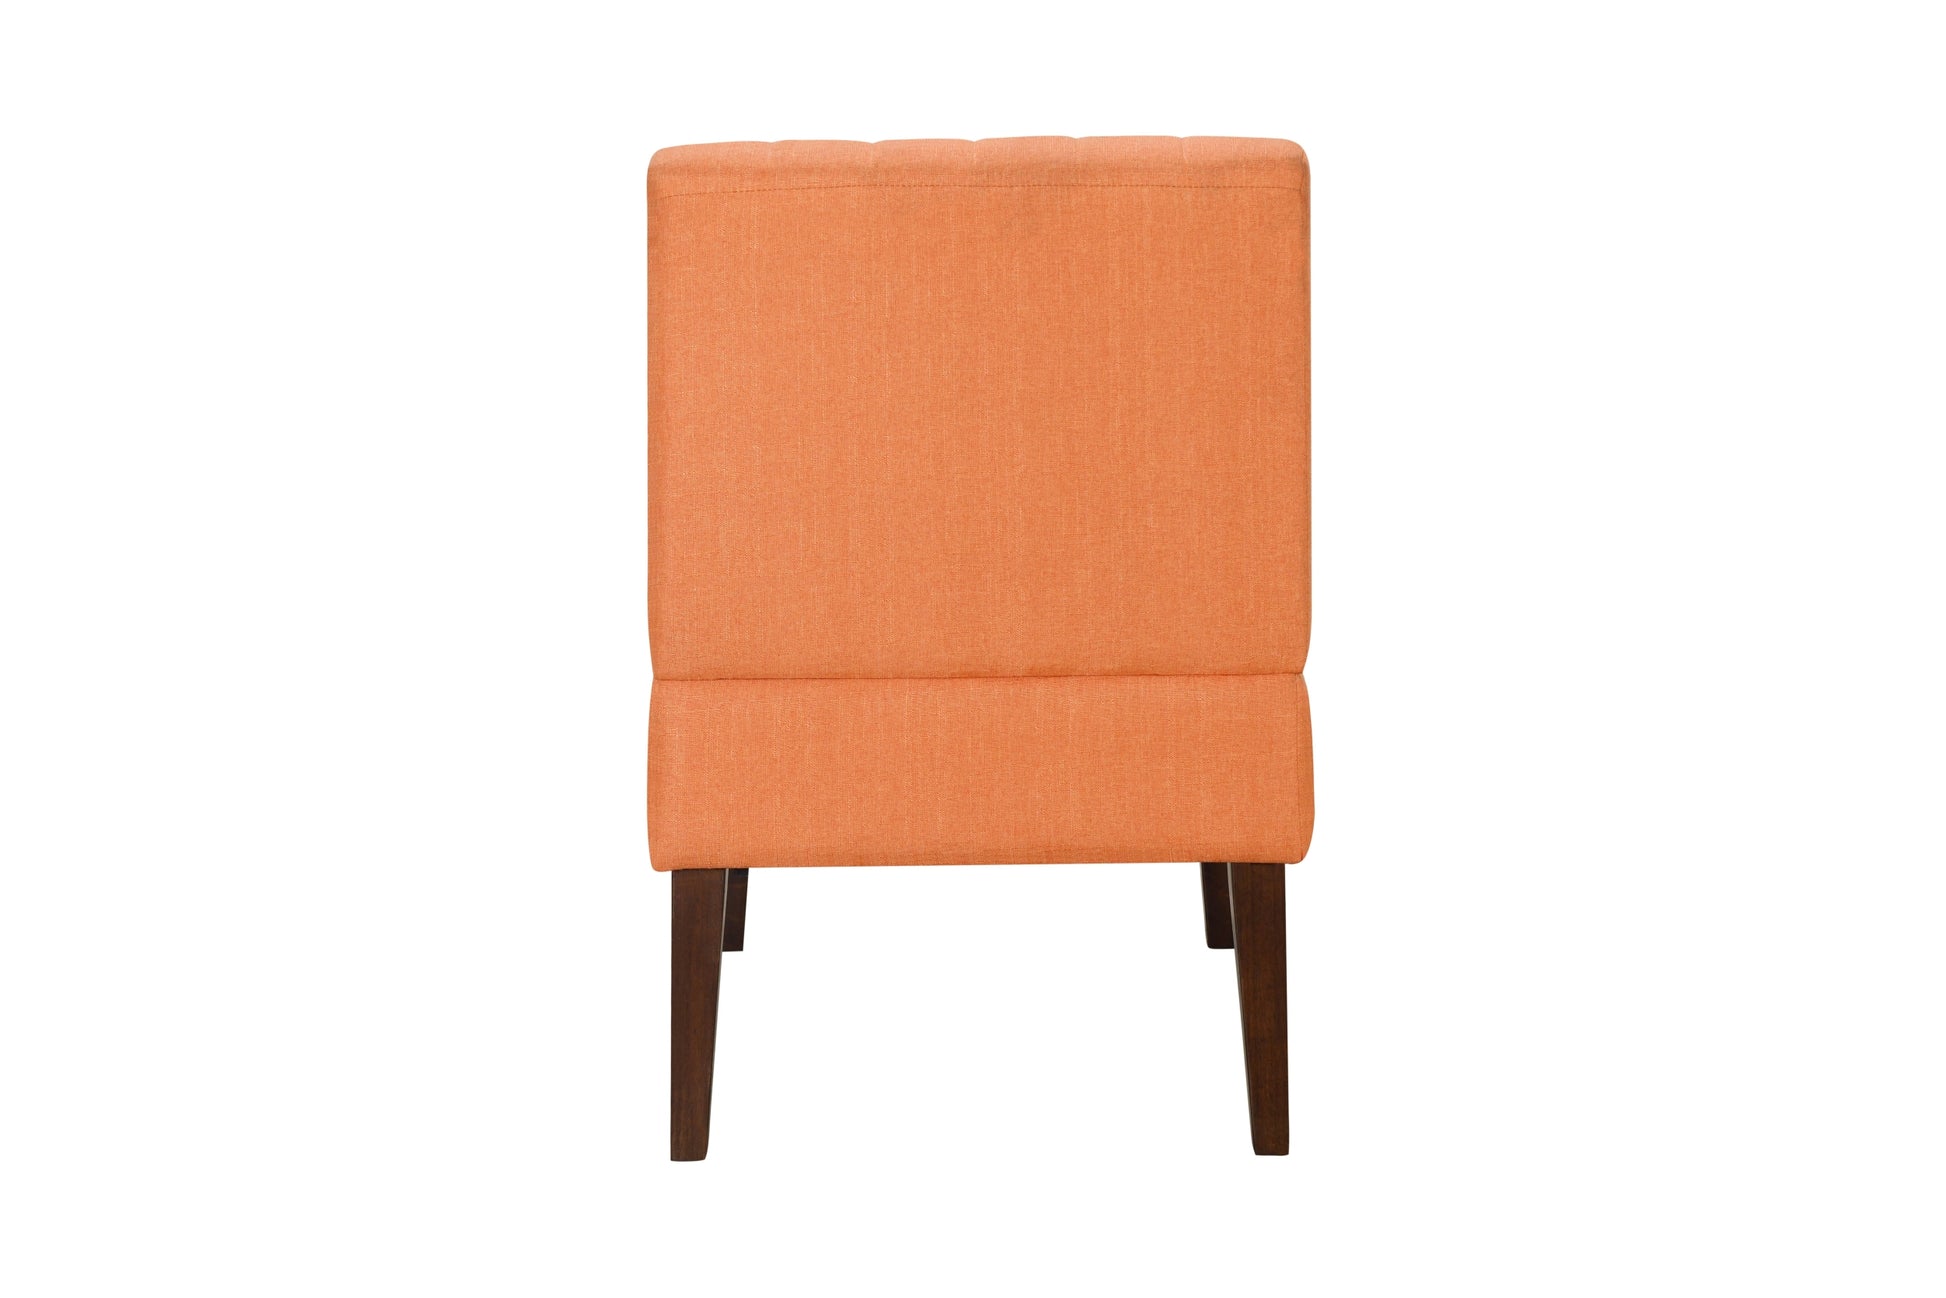 Stylish Comfortable Accent Chair 1pc Orange Fabric orange-primary living space-wood